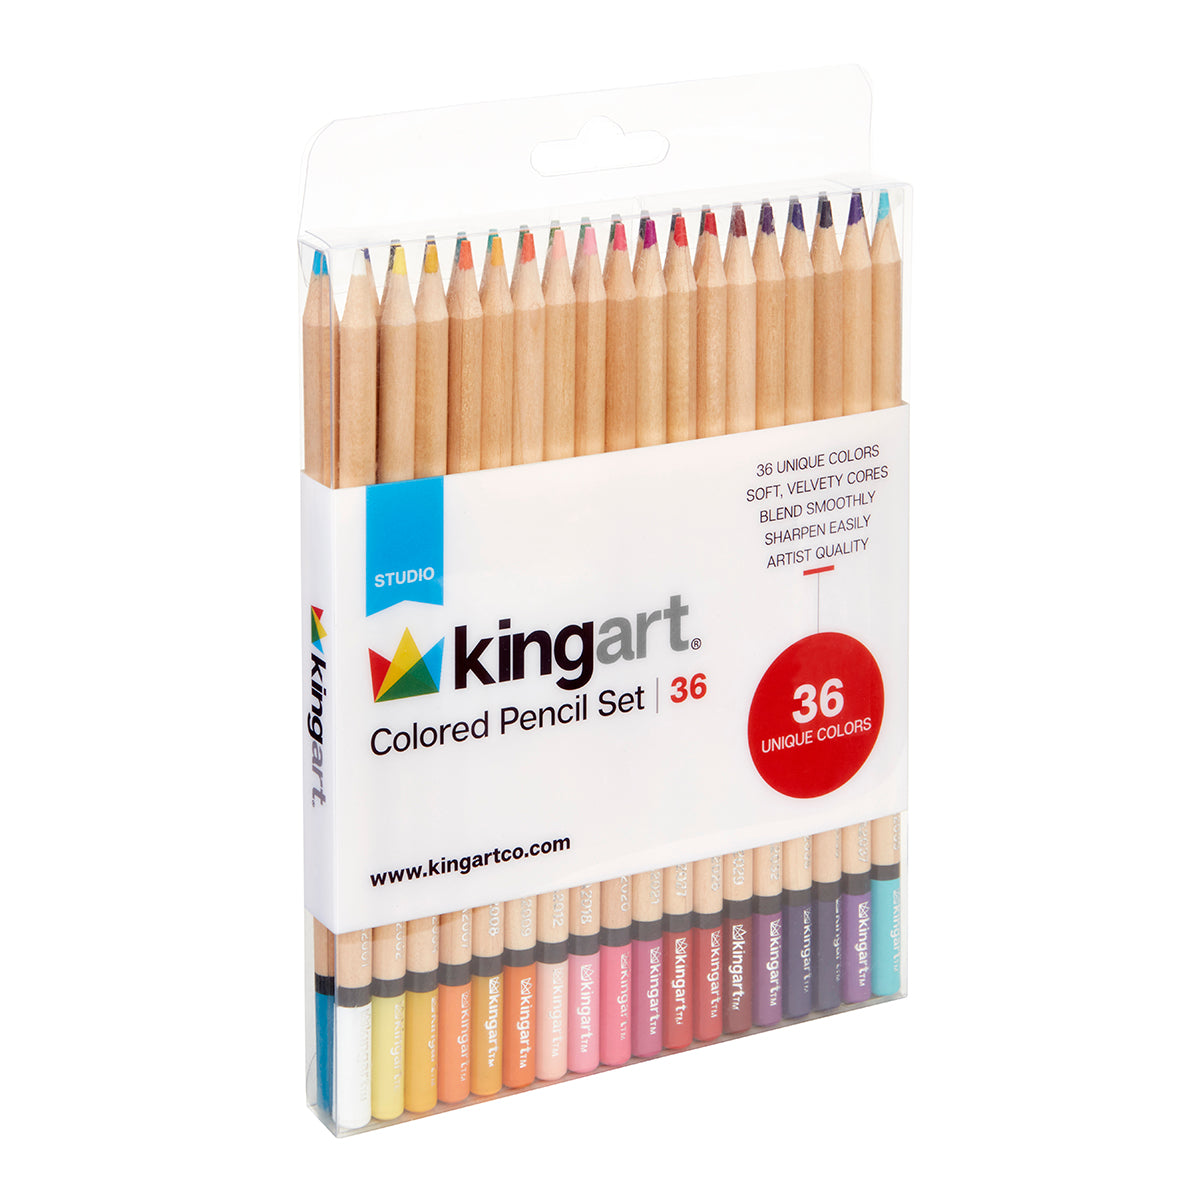 36PCS/Lot Colorful Core Lead Colored Pencils Set for Adults and